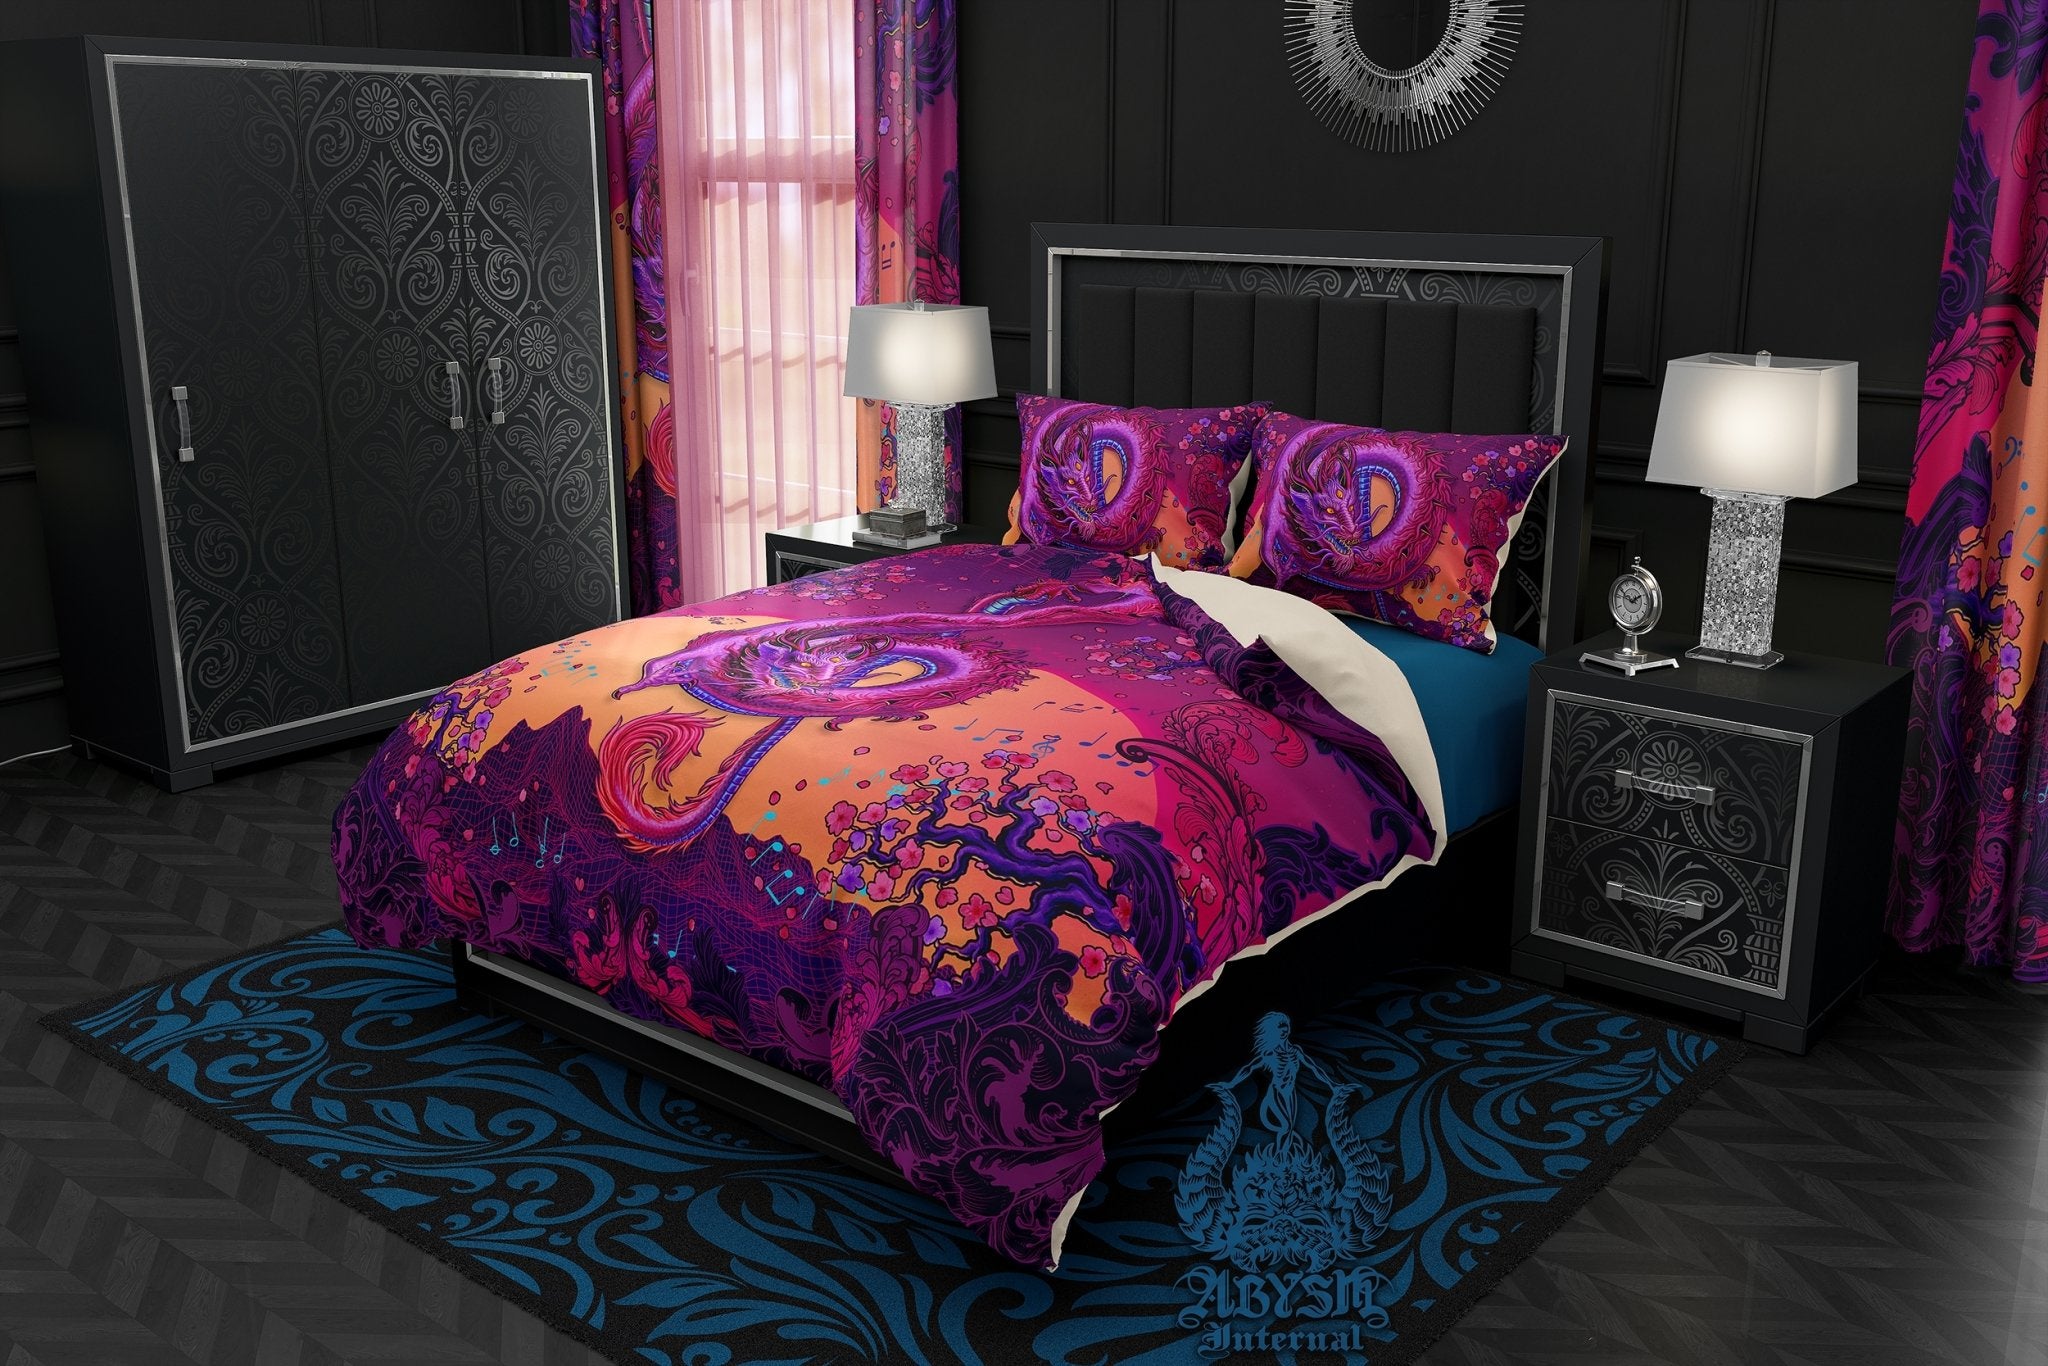 Synthwave Bedding Set, Comforter and Duvet, Vaporwave Bed Cover and Retrowave Bedroom Decor, King, Queen and Twin Size, Gamer Kids 80s Room - Psychedelic Music Dragon - Abysm Internal